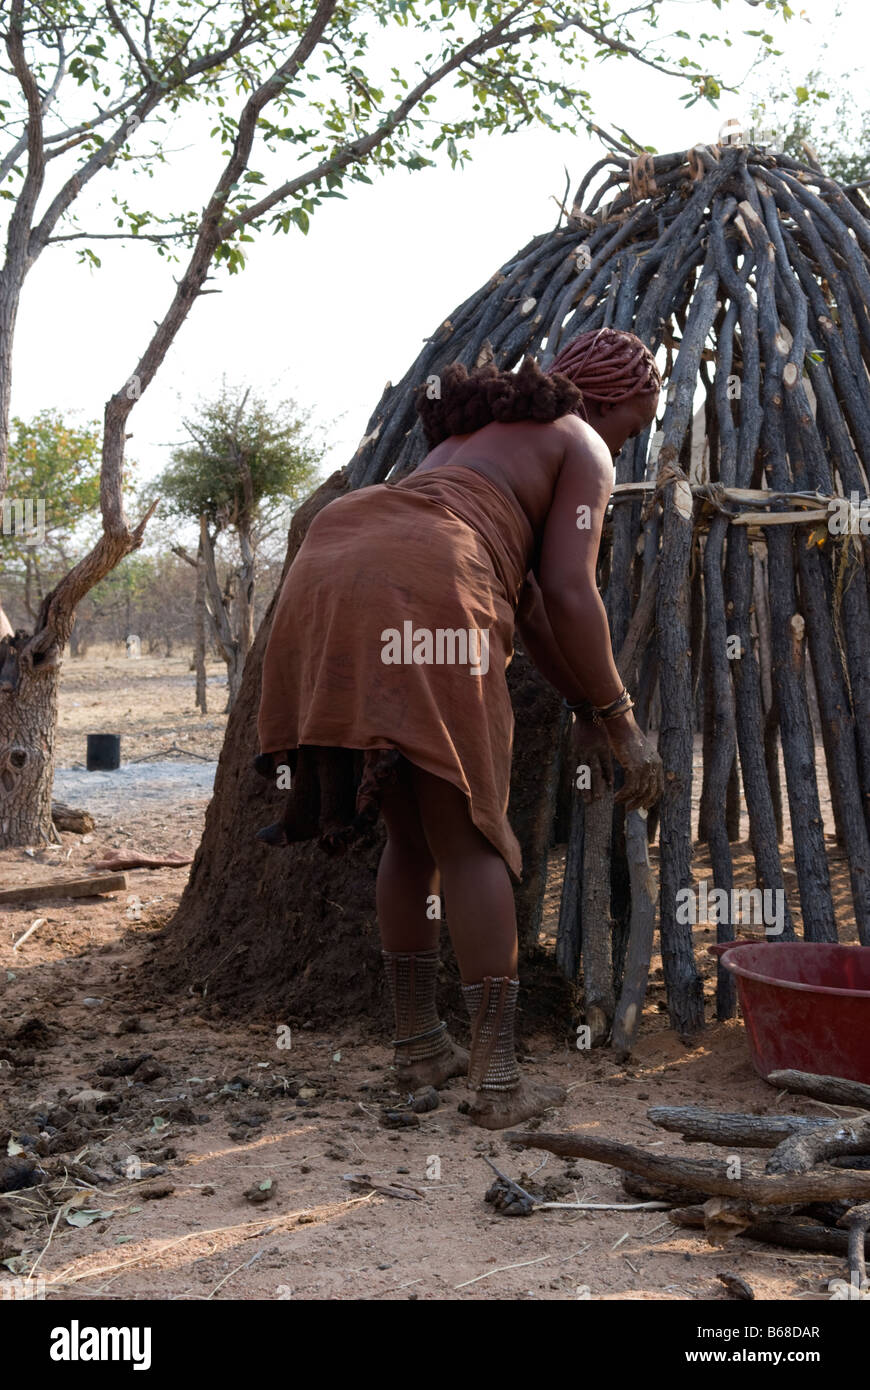 A young woman builds a traditionall village hut from sticks mud and dung at the Himba Oase Village near Kamanjab Namibia Africa Stock Photo